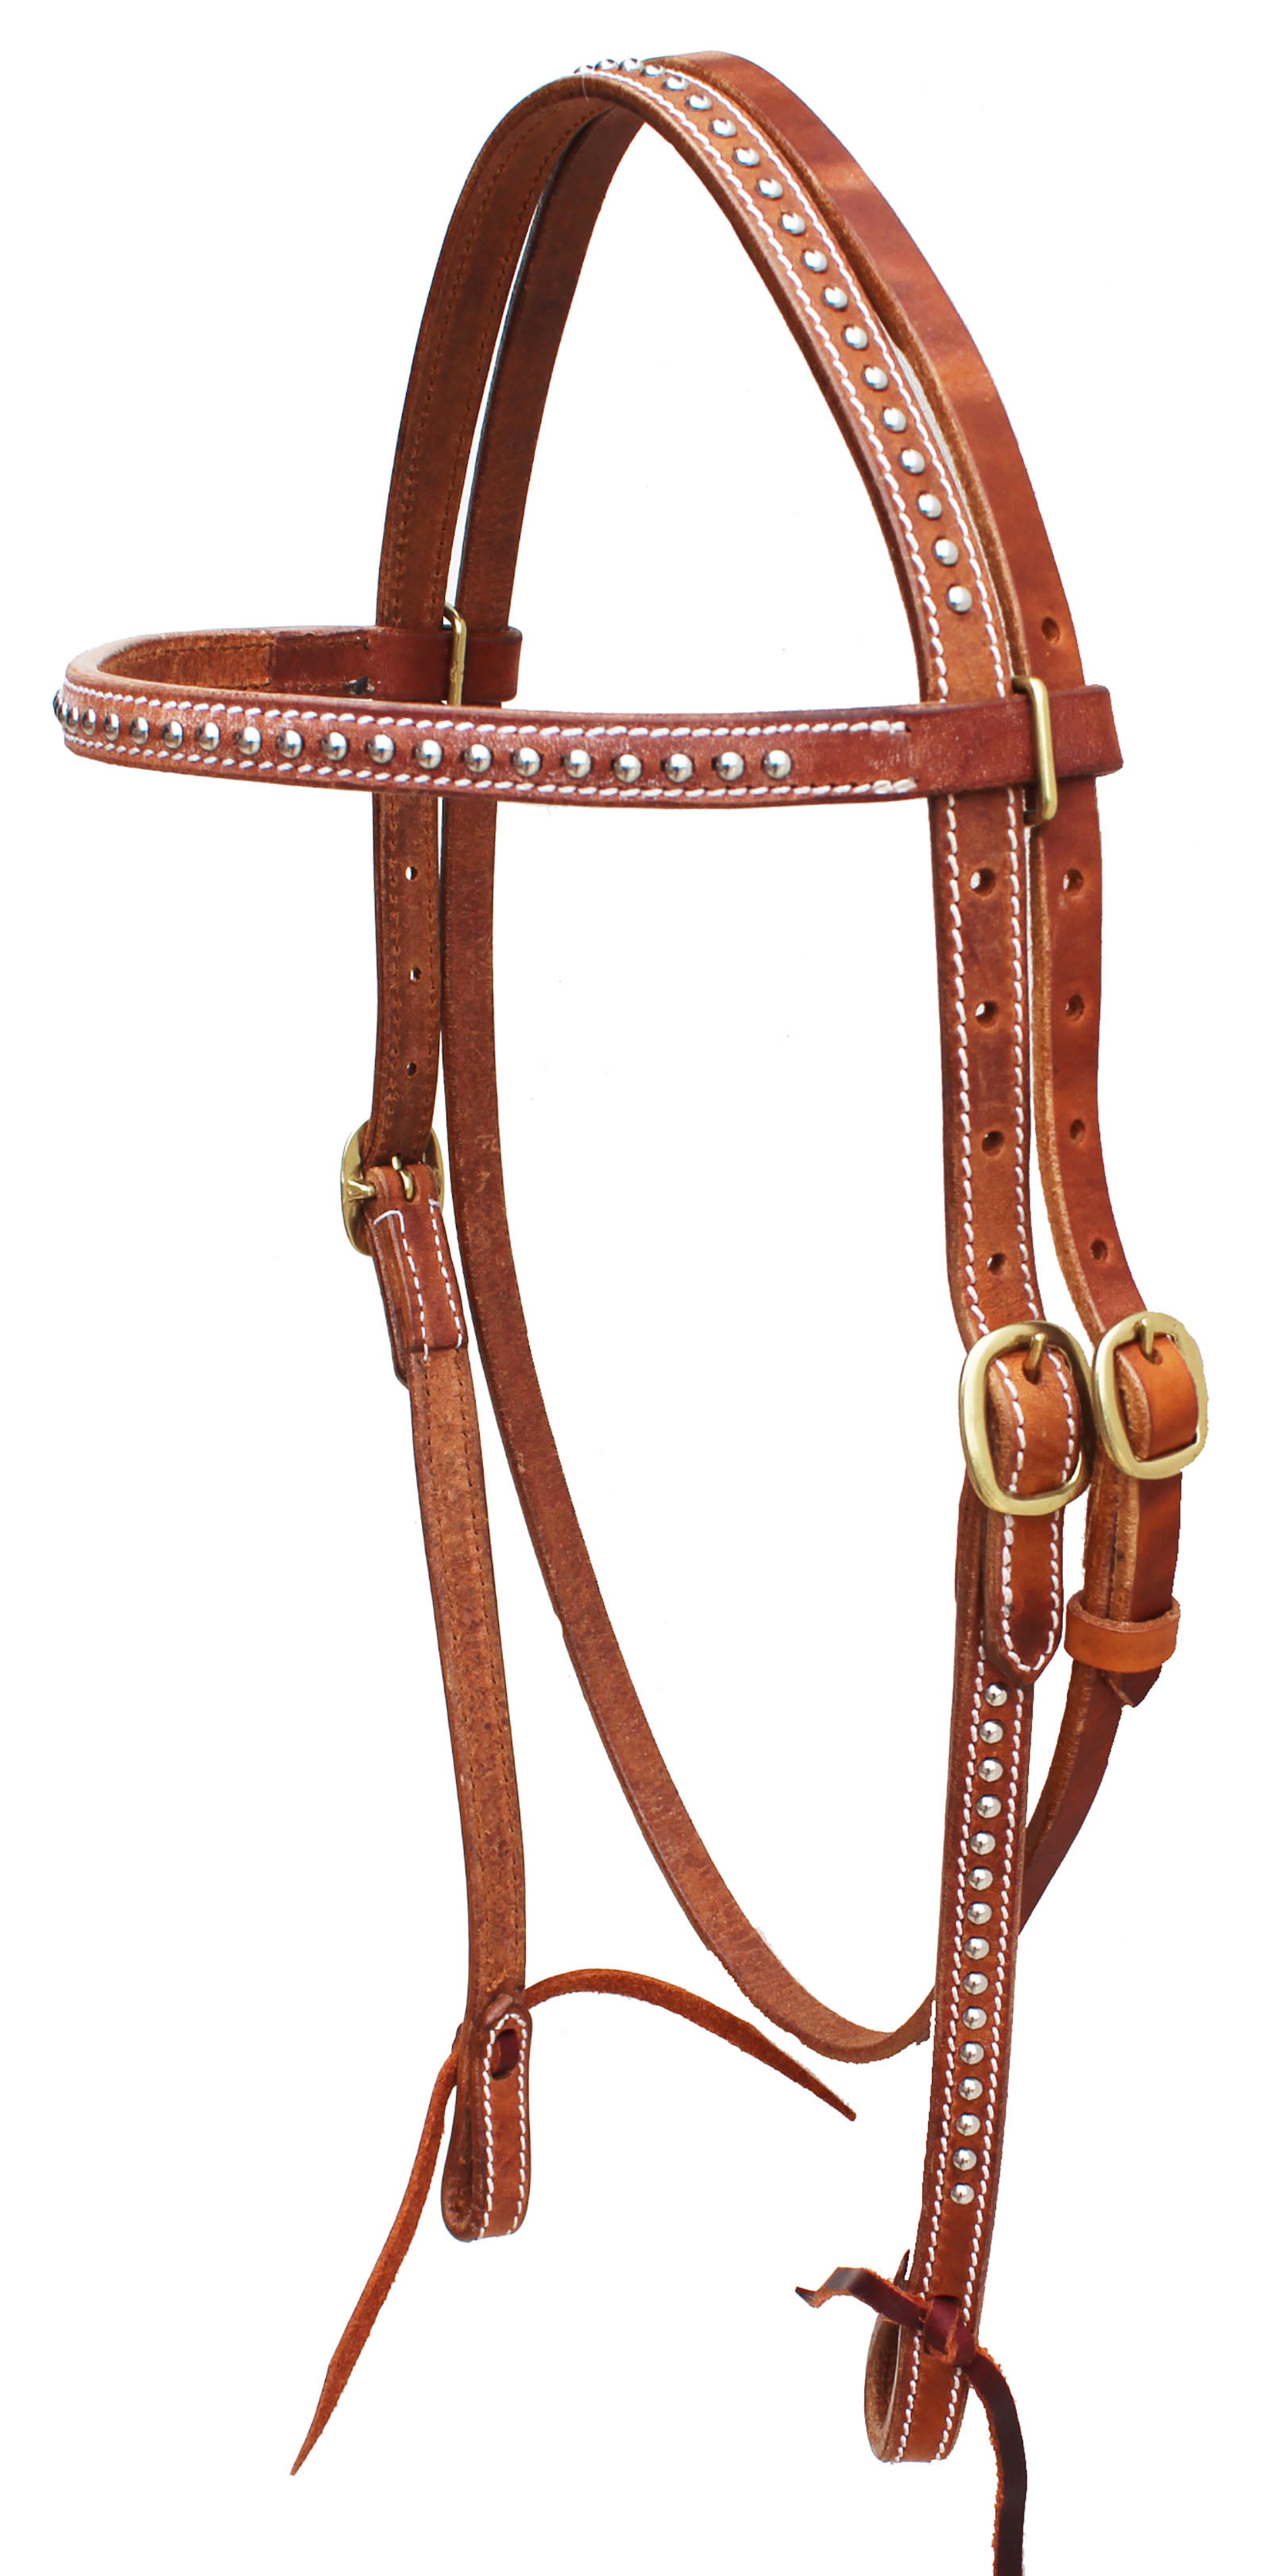 Horse Show Bridle Western Leather Beaded Browband Headstall Tie Ends 79110HB1 